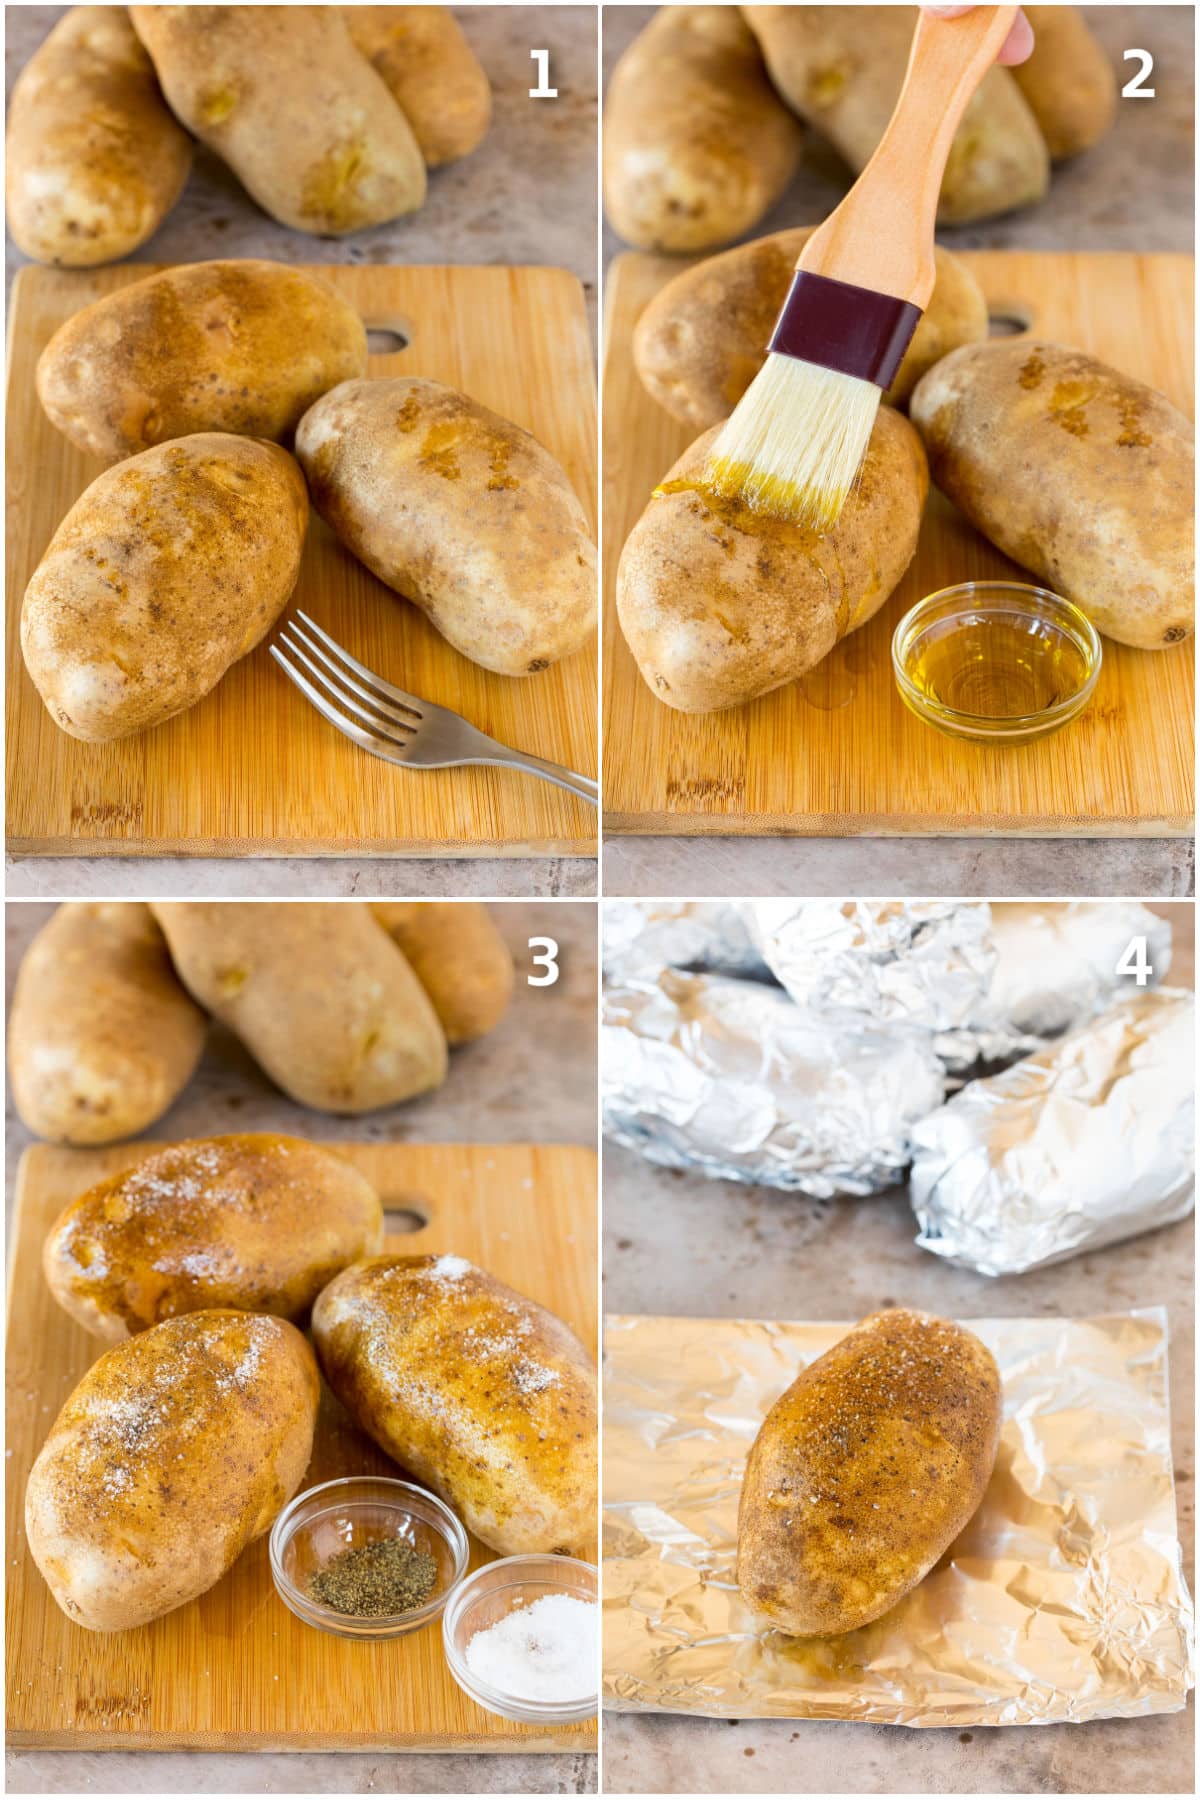 Photos showing how to prepare baked potatoes to go in a slow cooker.